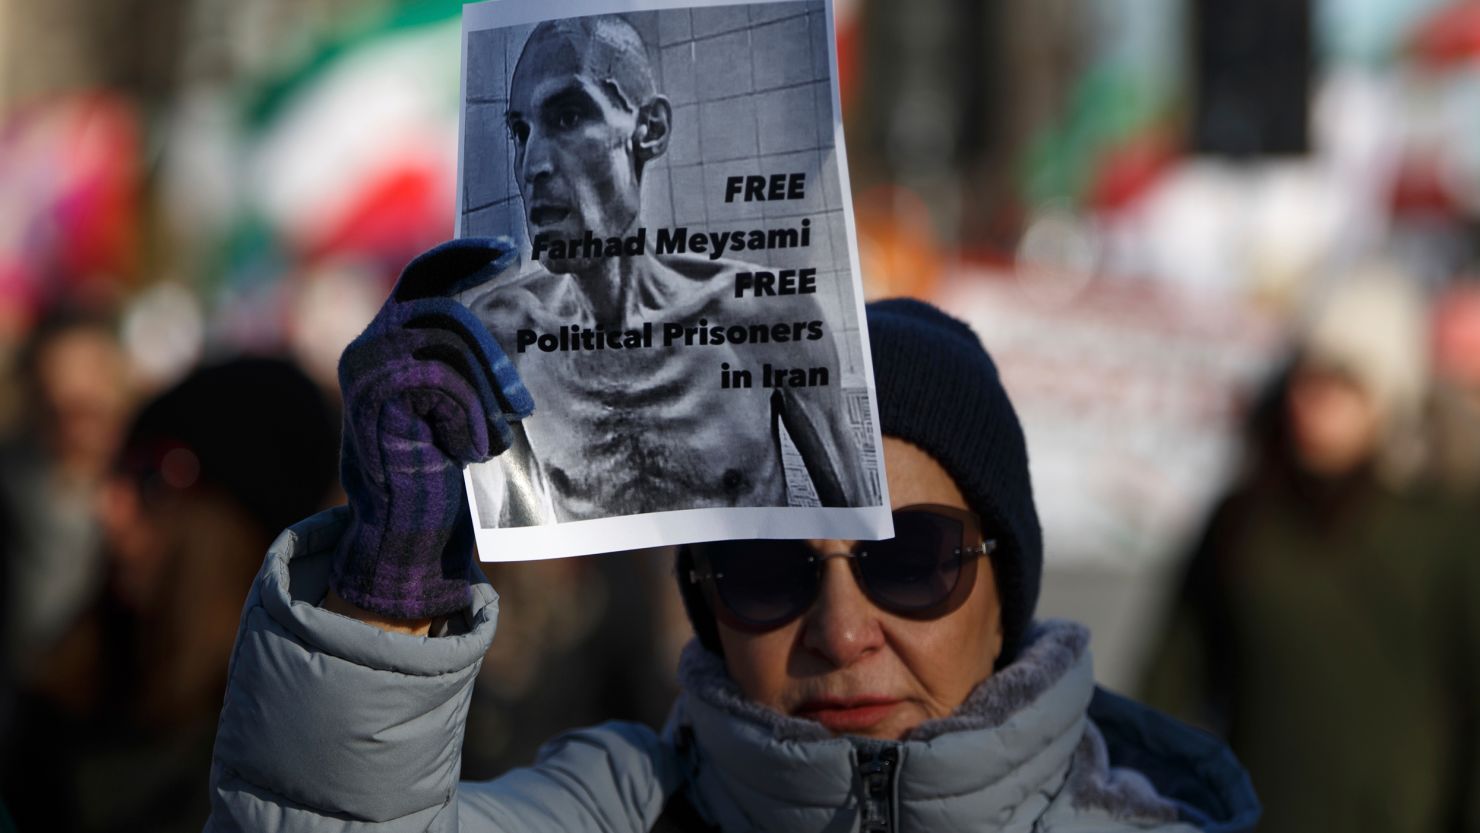 A woman holds an image of Farhad Meysami during a march in Washington, D.C. on February 4, 2023.